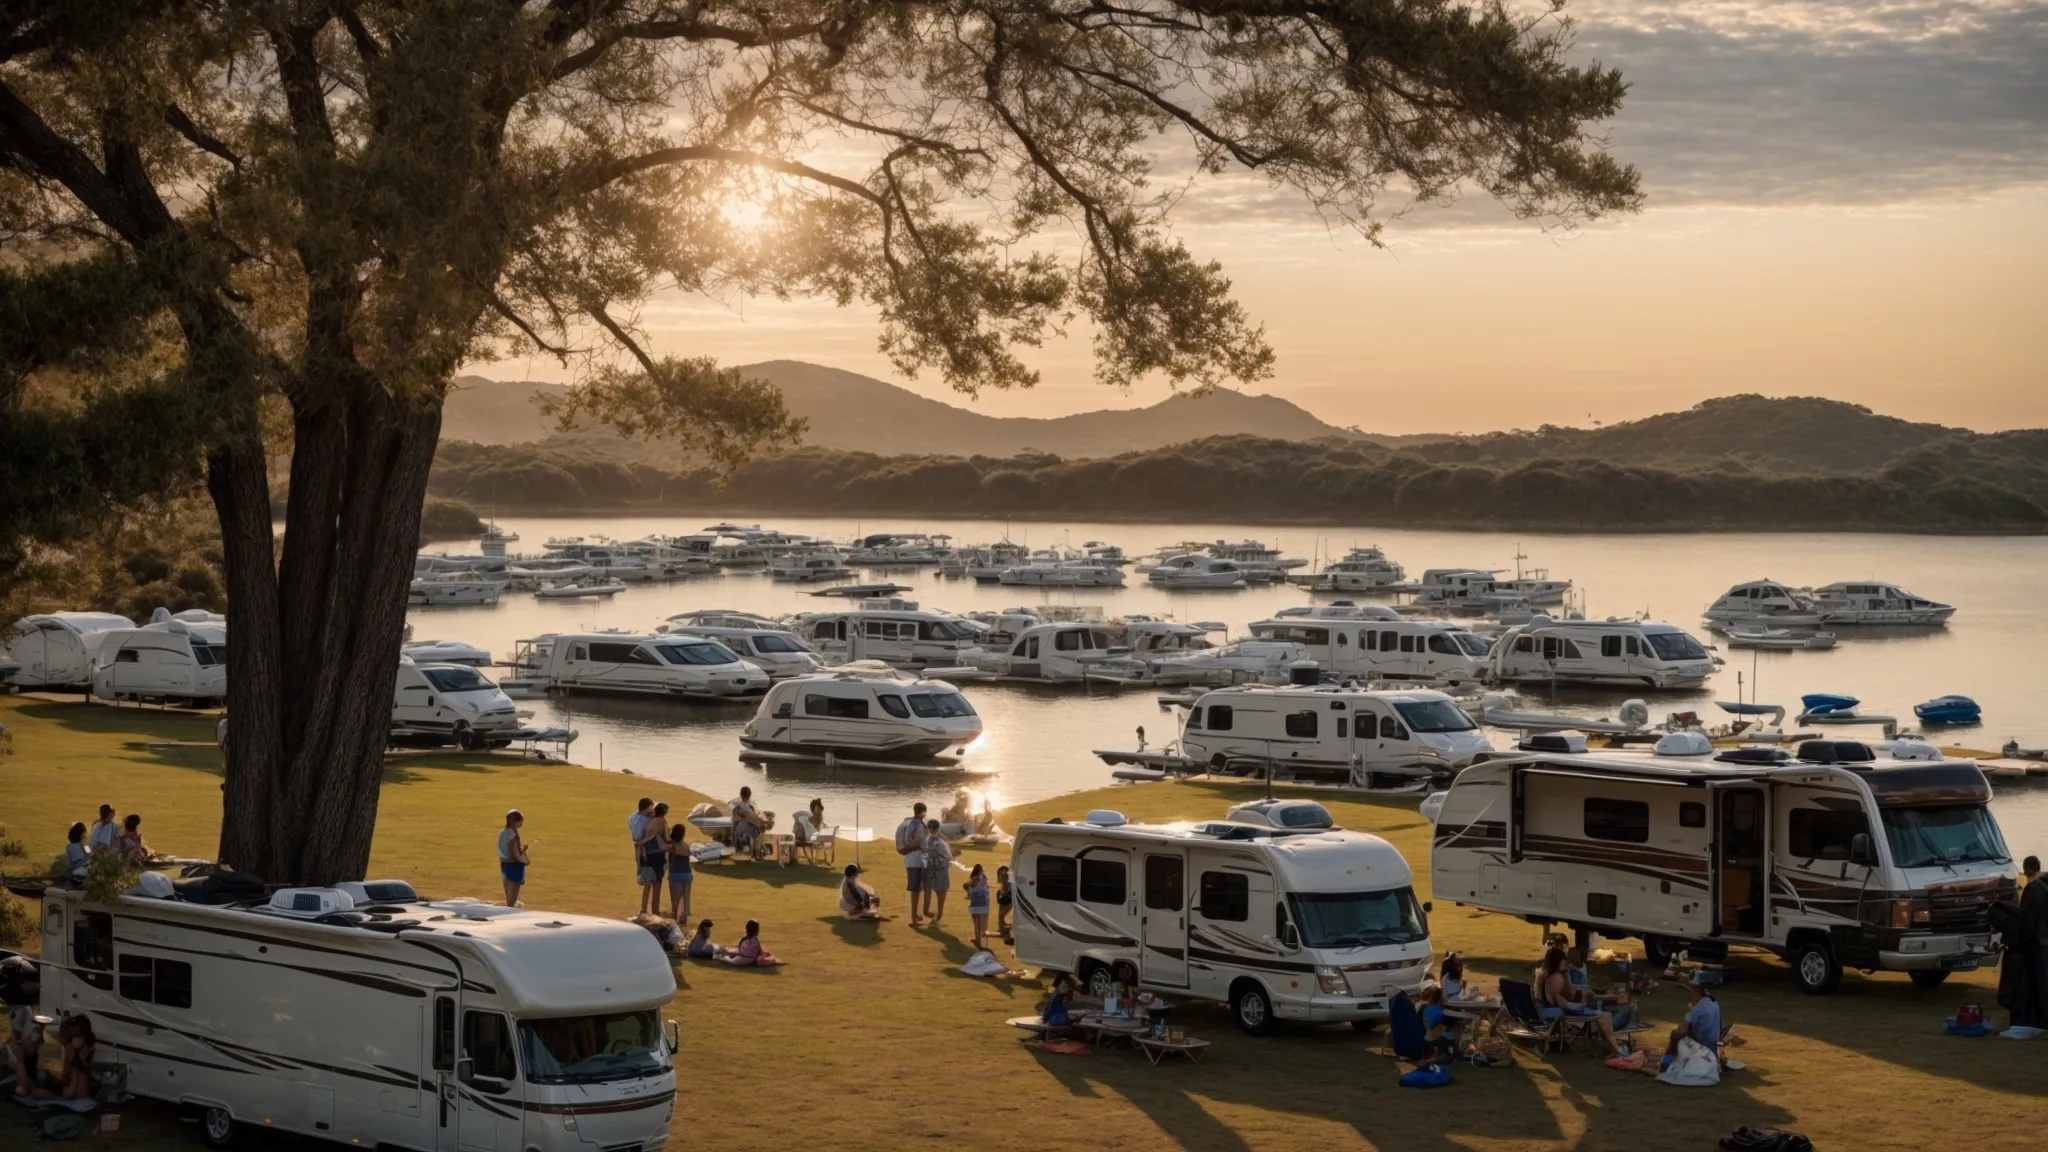 an array of rvs parked along the edge of a tranquil bay, with families enjoying picnics by the water's edge under a sunset sky.